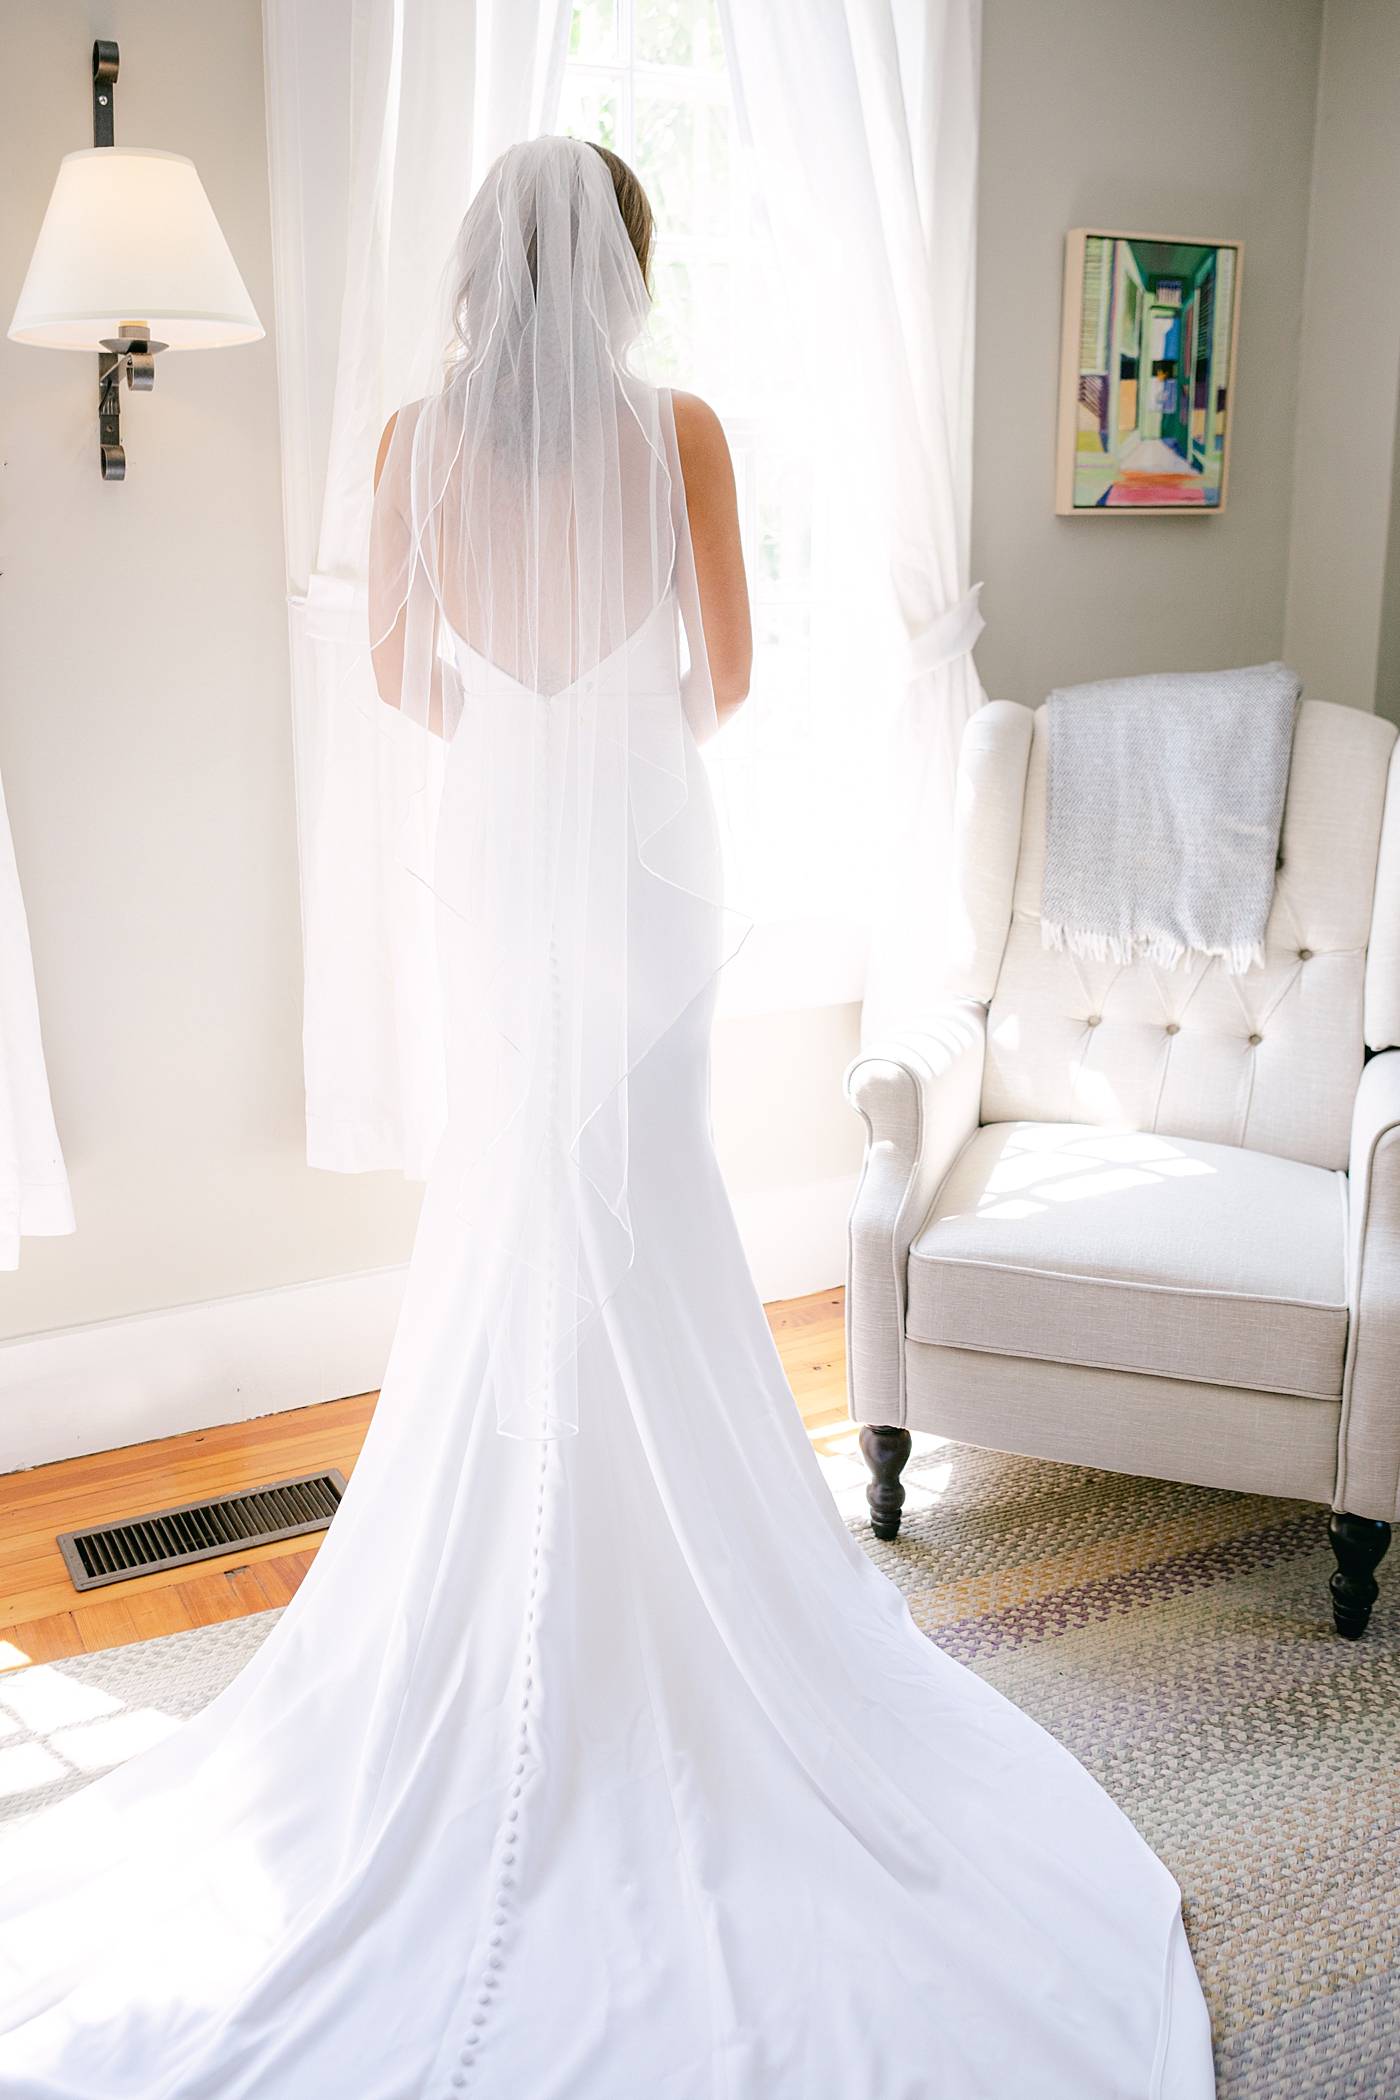 Bride standing near a window | Image by Hope Helmuth Photography